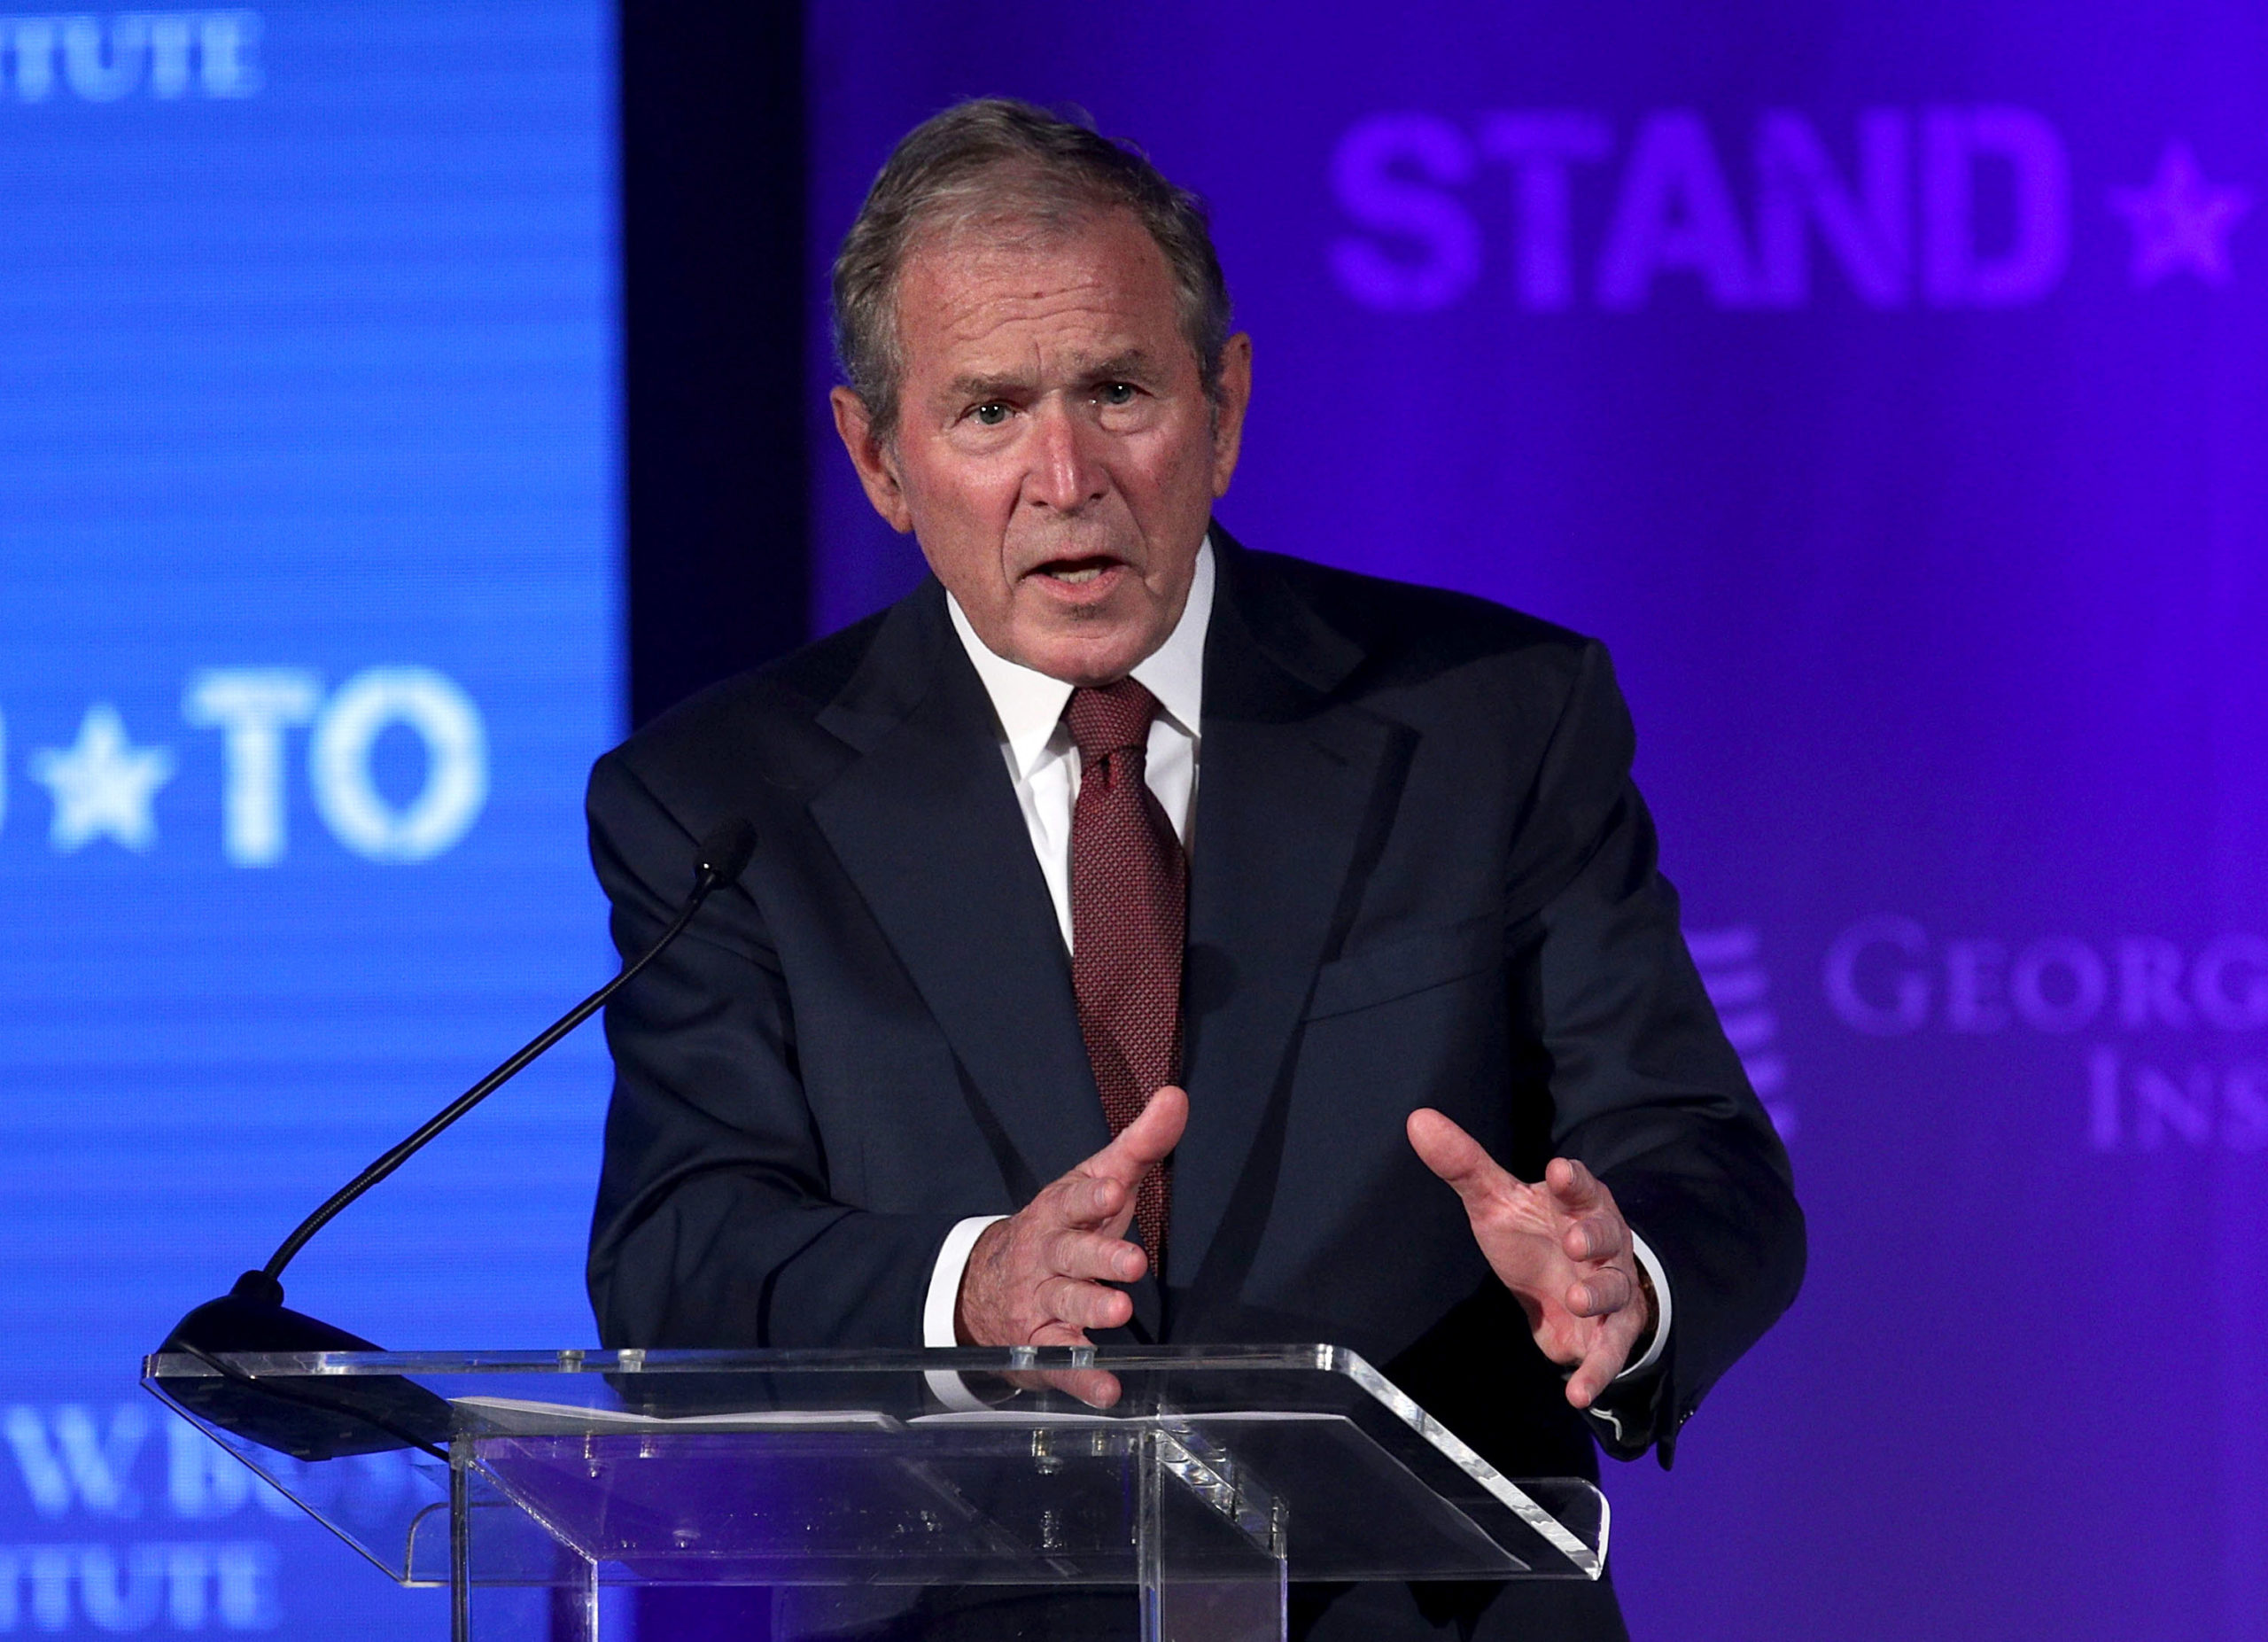 WASHINGTON, DC - JUNE 23: Former U.S. President George W. Bush speaks during a conference at the U.S. Chamber of Commerce June 23, 2017 in Washington, DC. The George W. Bush Institute hosted a conference to address veteran issues. (Photo by Alex Wong/Getty Images)